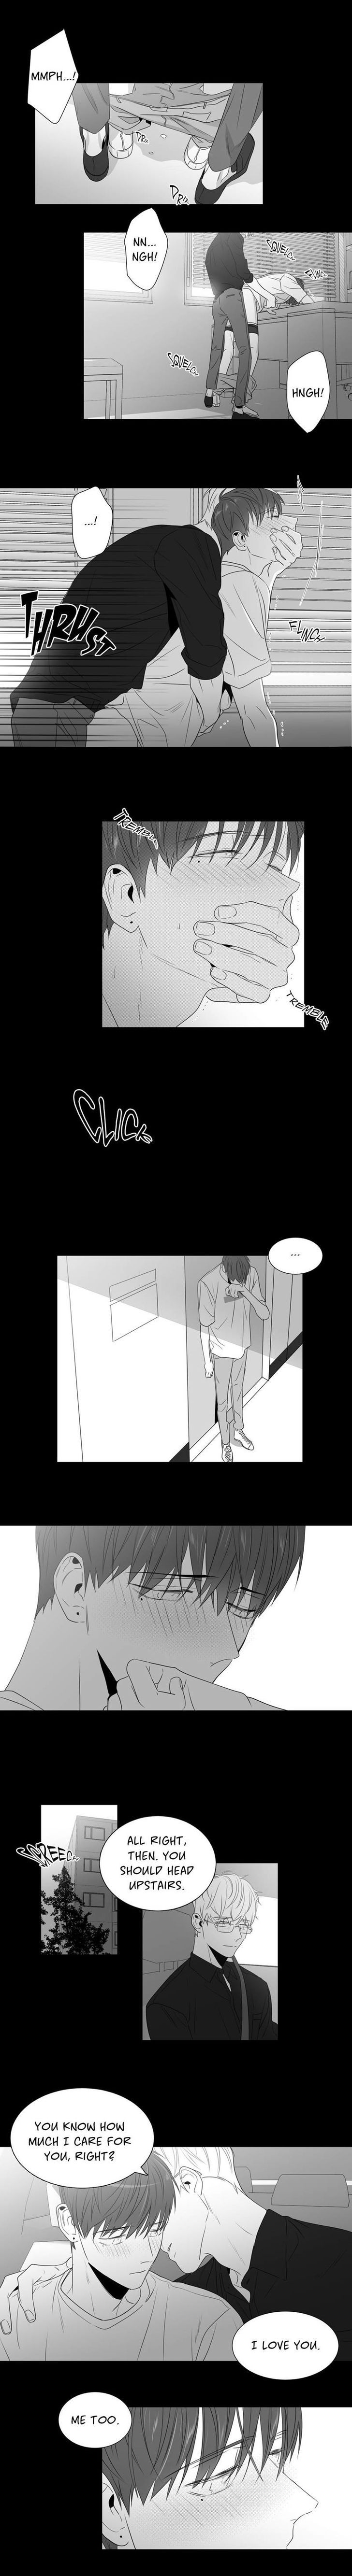 Lover Boy (Lezhin) Chapter 047.1 page 6